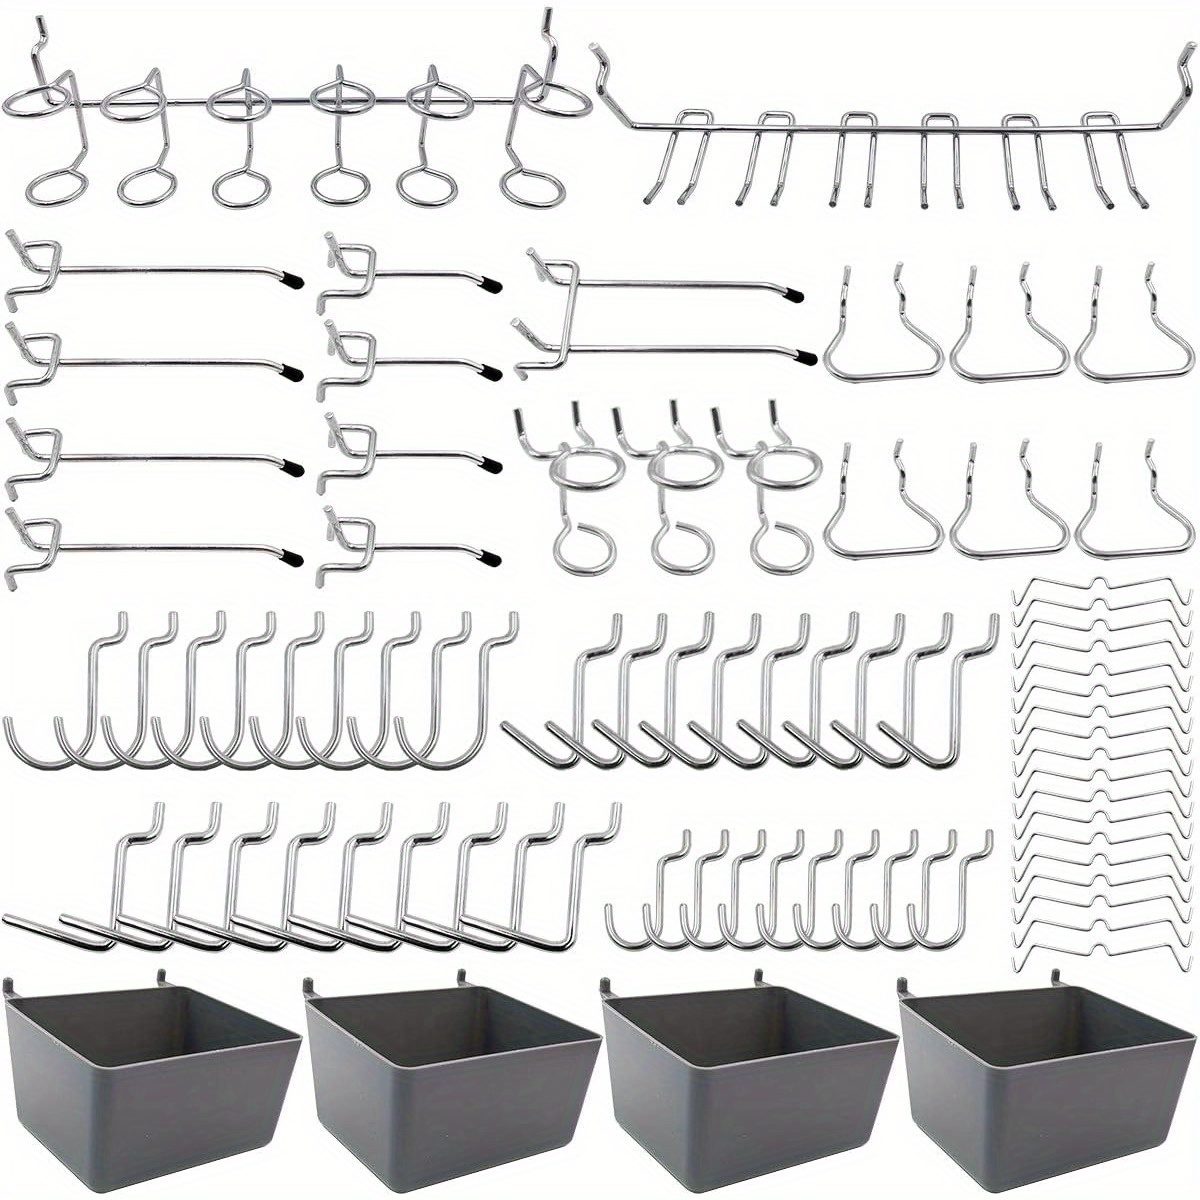 80pcs Pegboard Hooks Assortment With Pegboard Bins, Peg Locks, For  Organizing Various Tools,Showcase Hook With Perforated Plate Hook